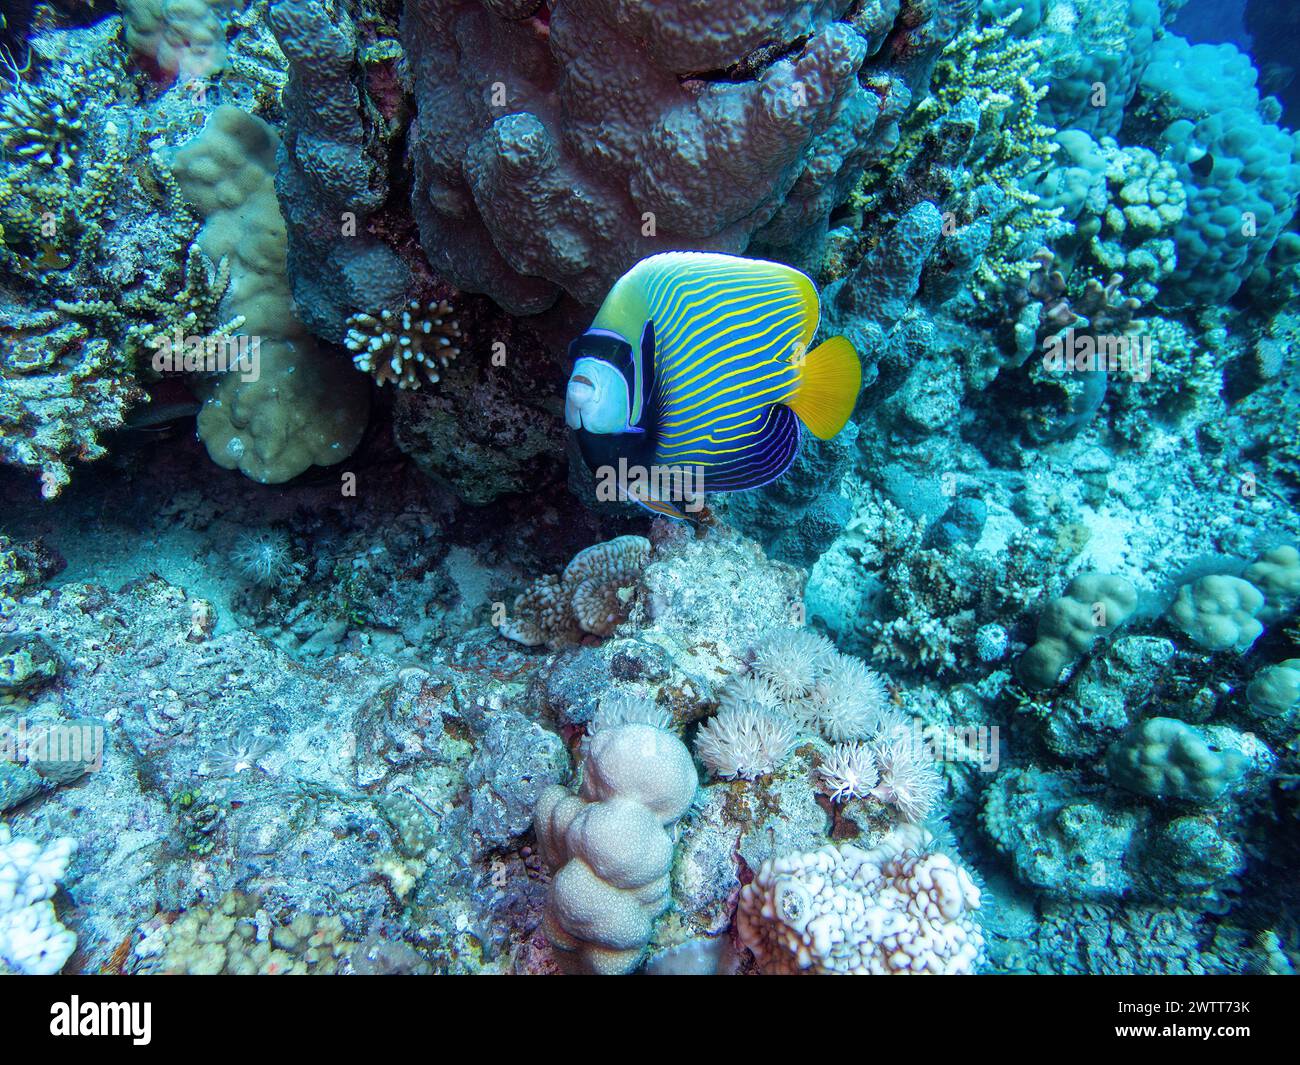 Emperor angelfish in the coral reef during a dive in Bali Stock Photo